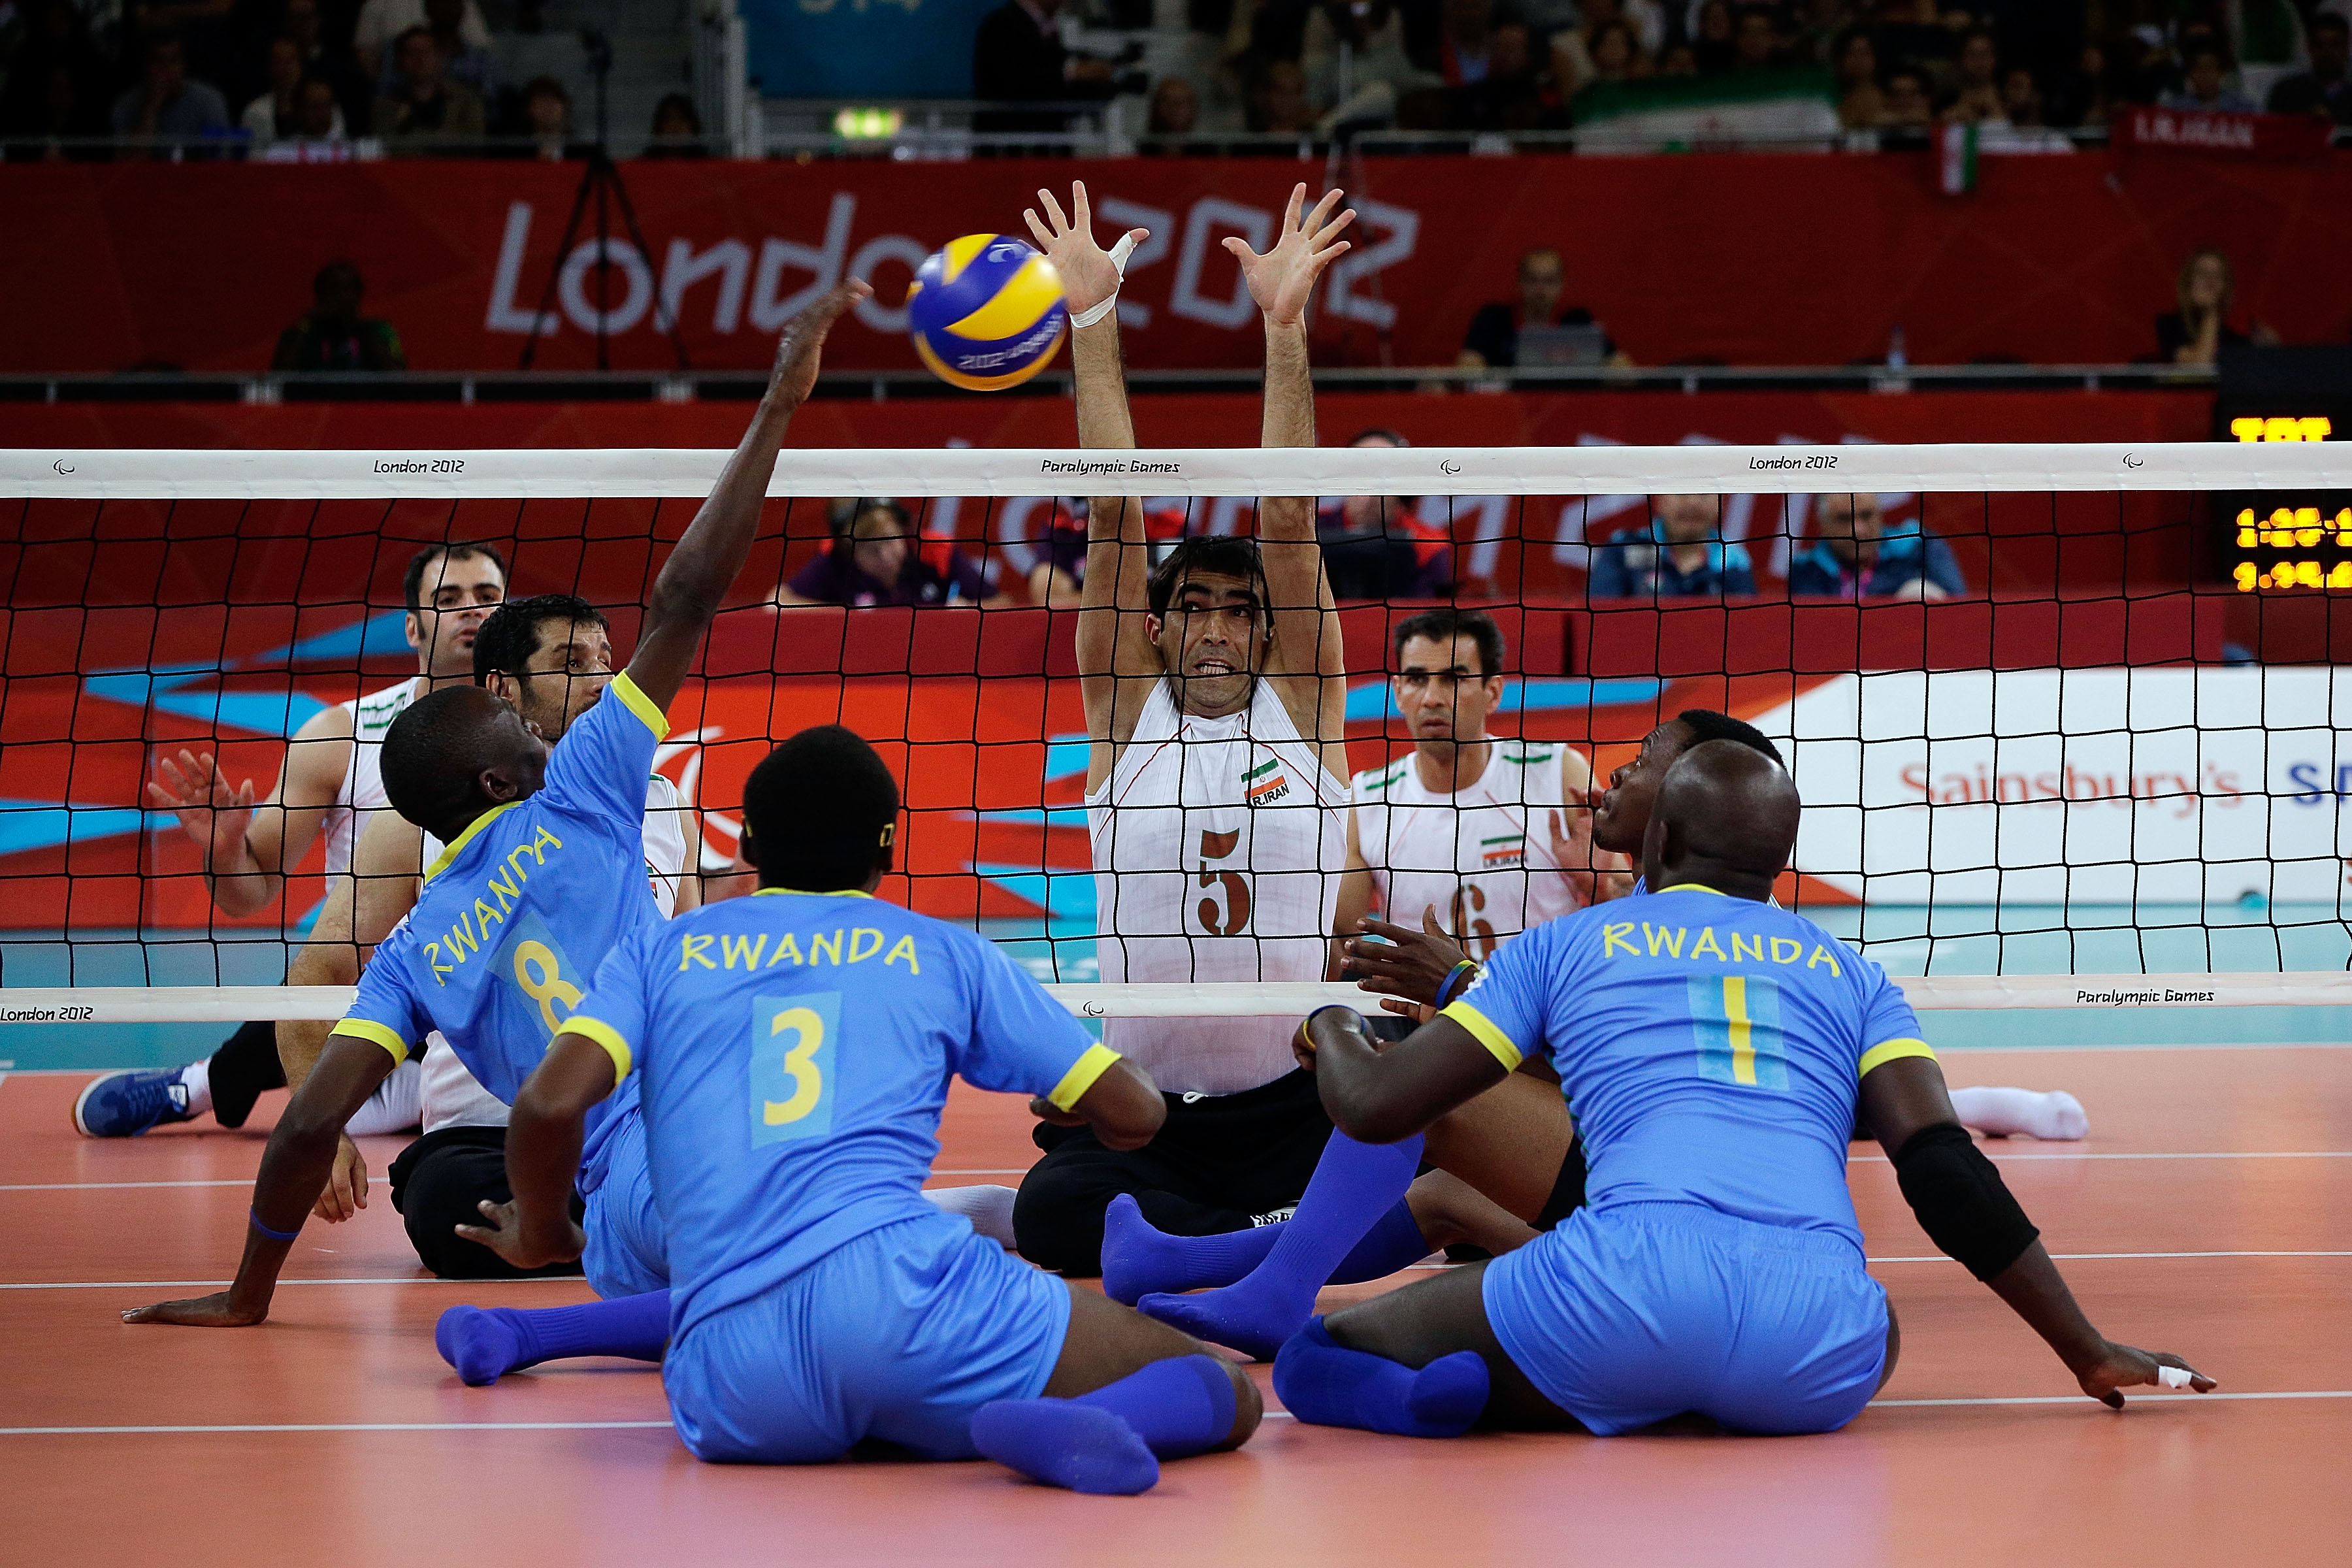 Iran sitting volleyball team cruises to opening win